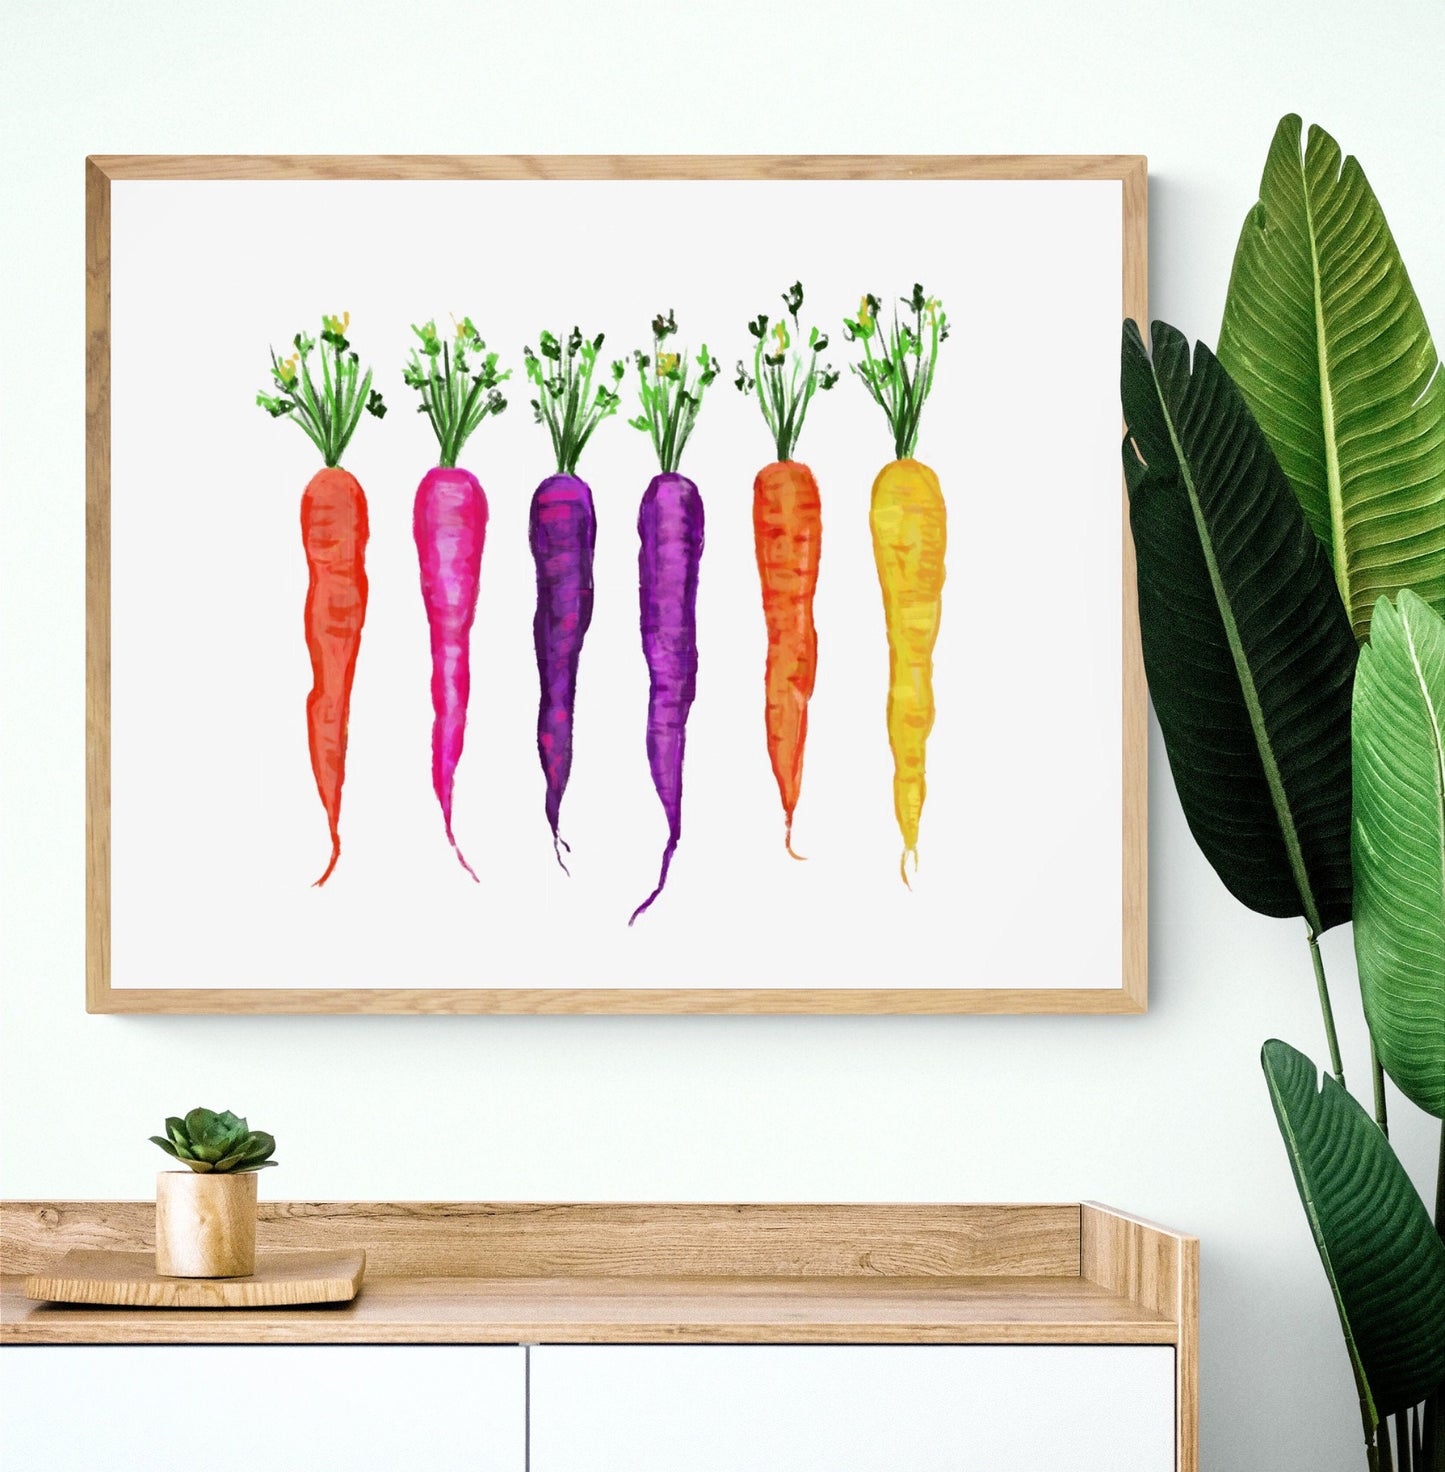 Colorful Carrots Print, Carrot Painting, Vegetable Decor, Kitchen Wall Art, Carrot Bunch Illustration, Food Wall Art